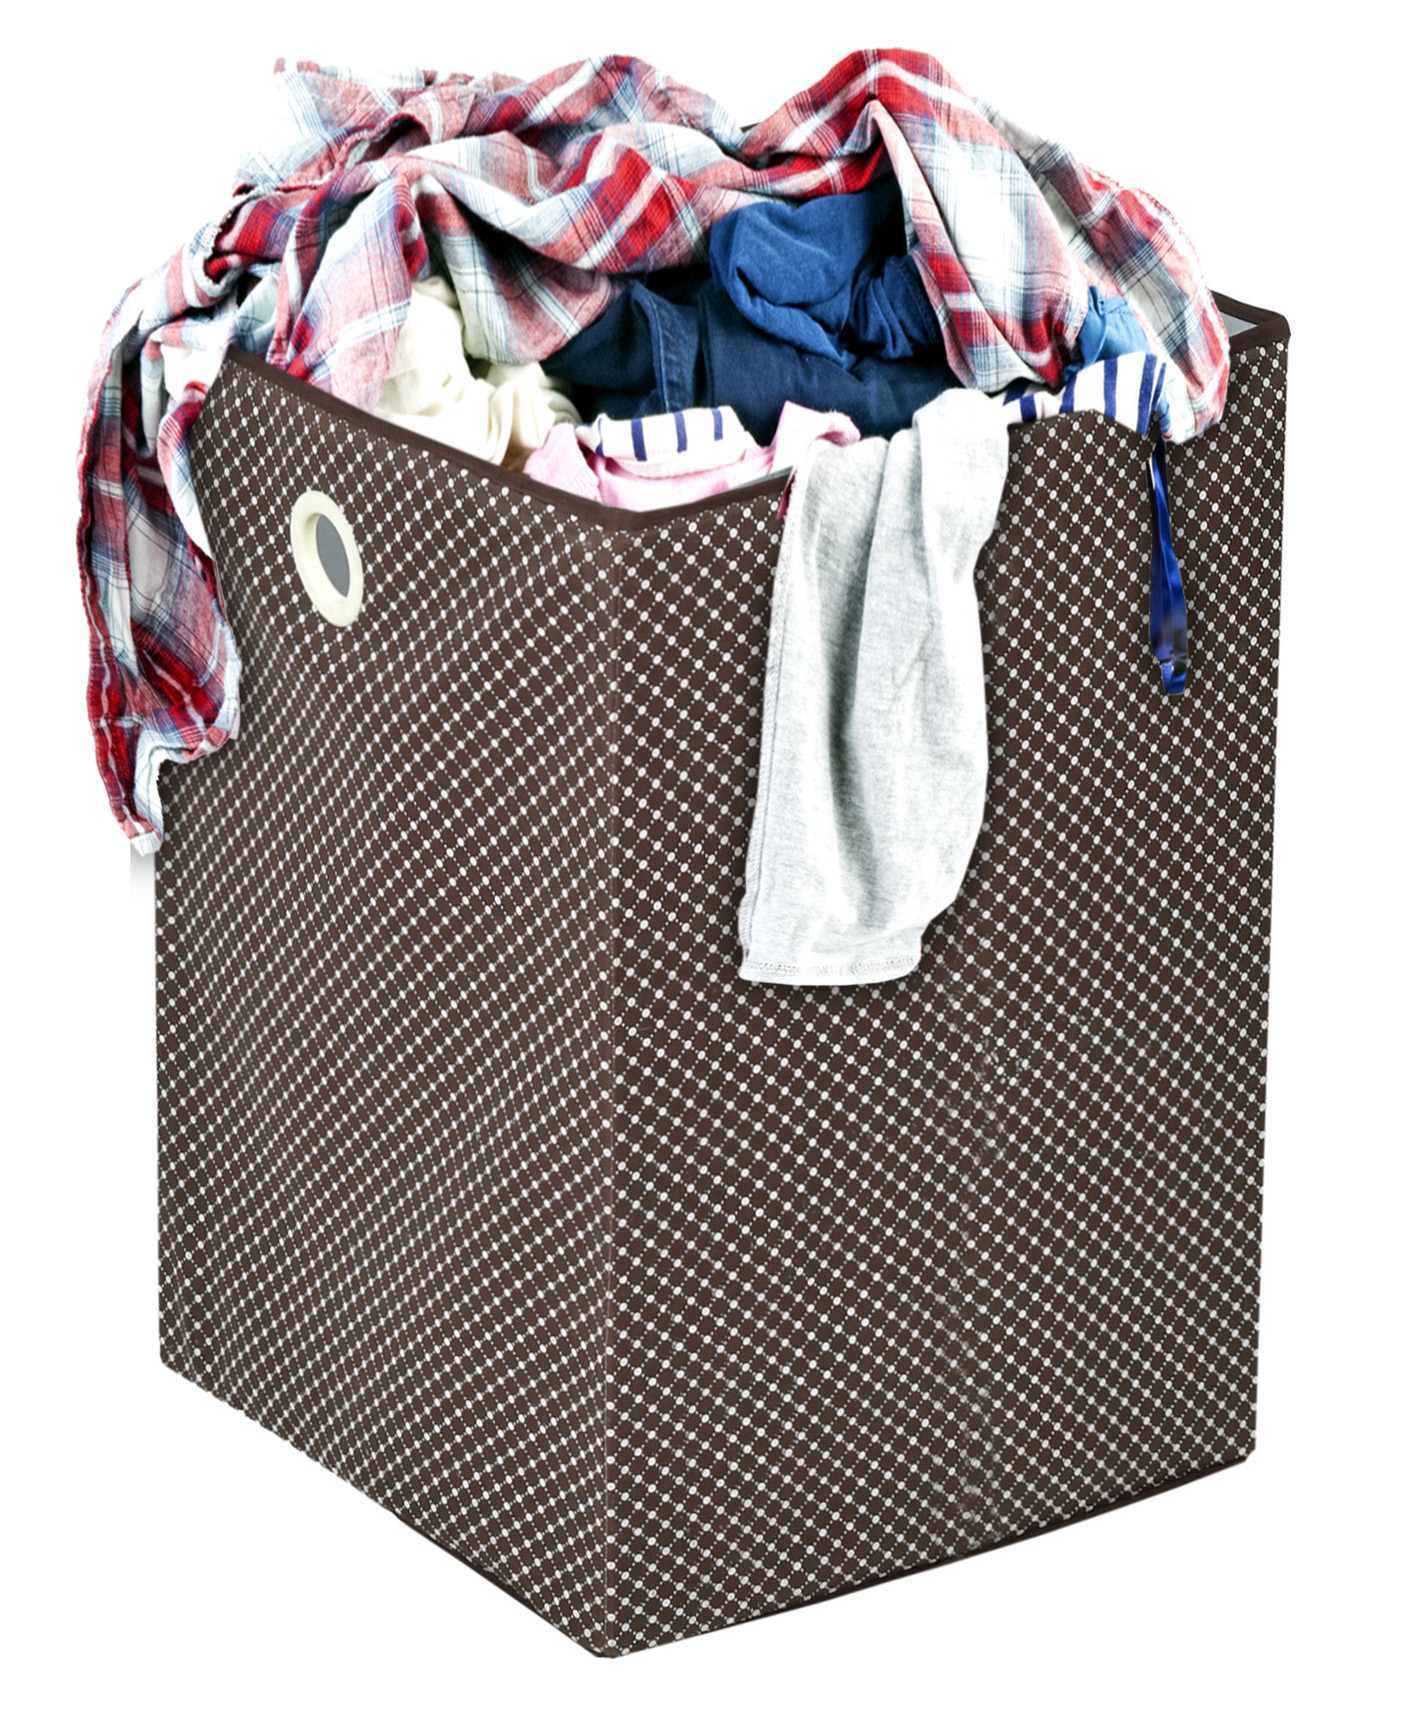 Kuber Industries Polka Dot Printed Cotton Foldable Large Laundry basket/Hamper With Handles (Maroon)-44KM0209